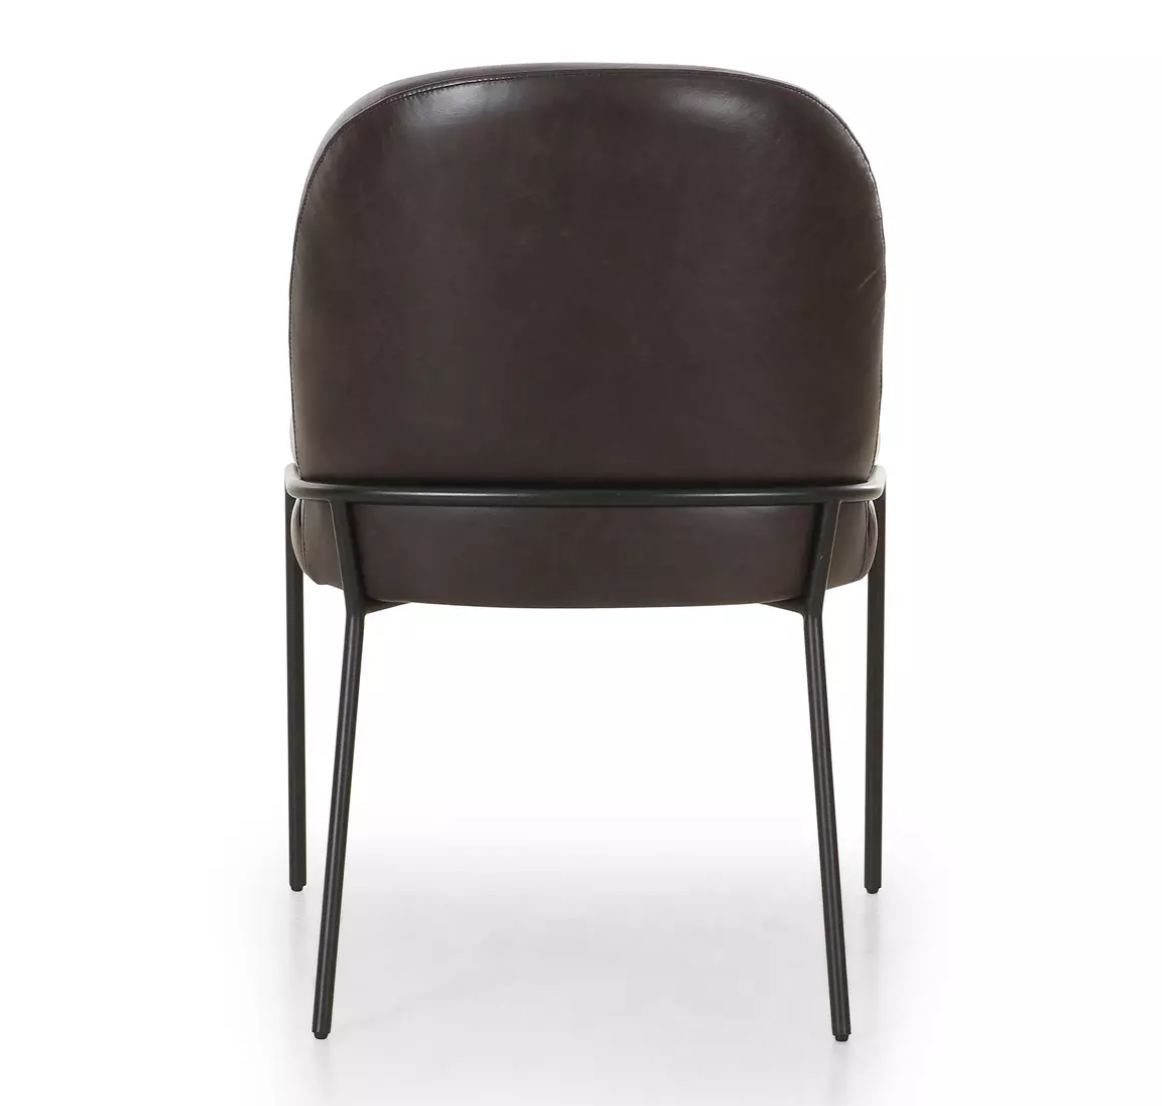 Astrud Dining Chair